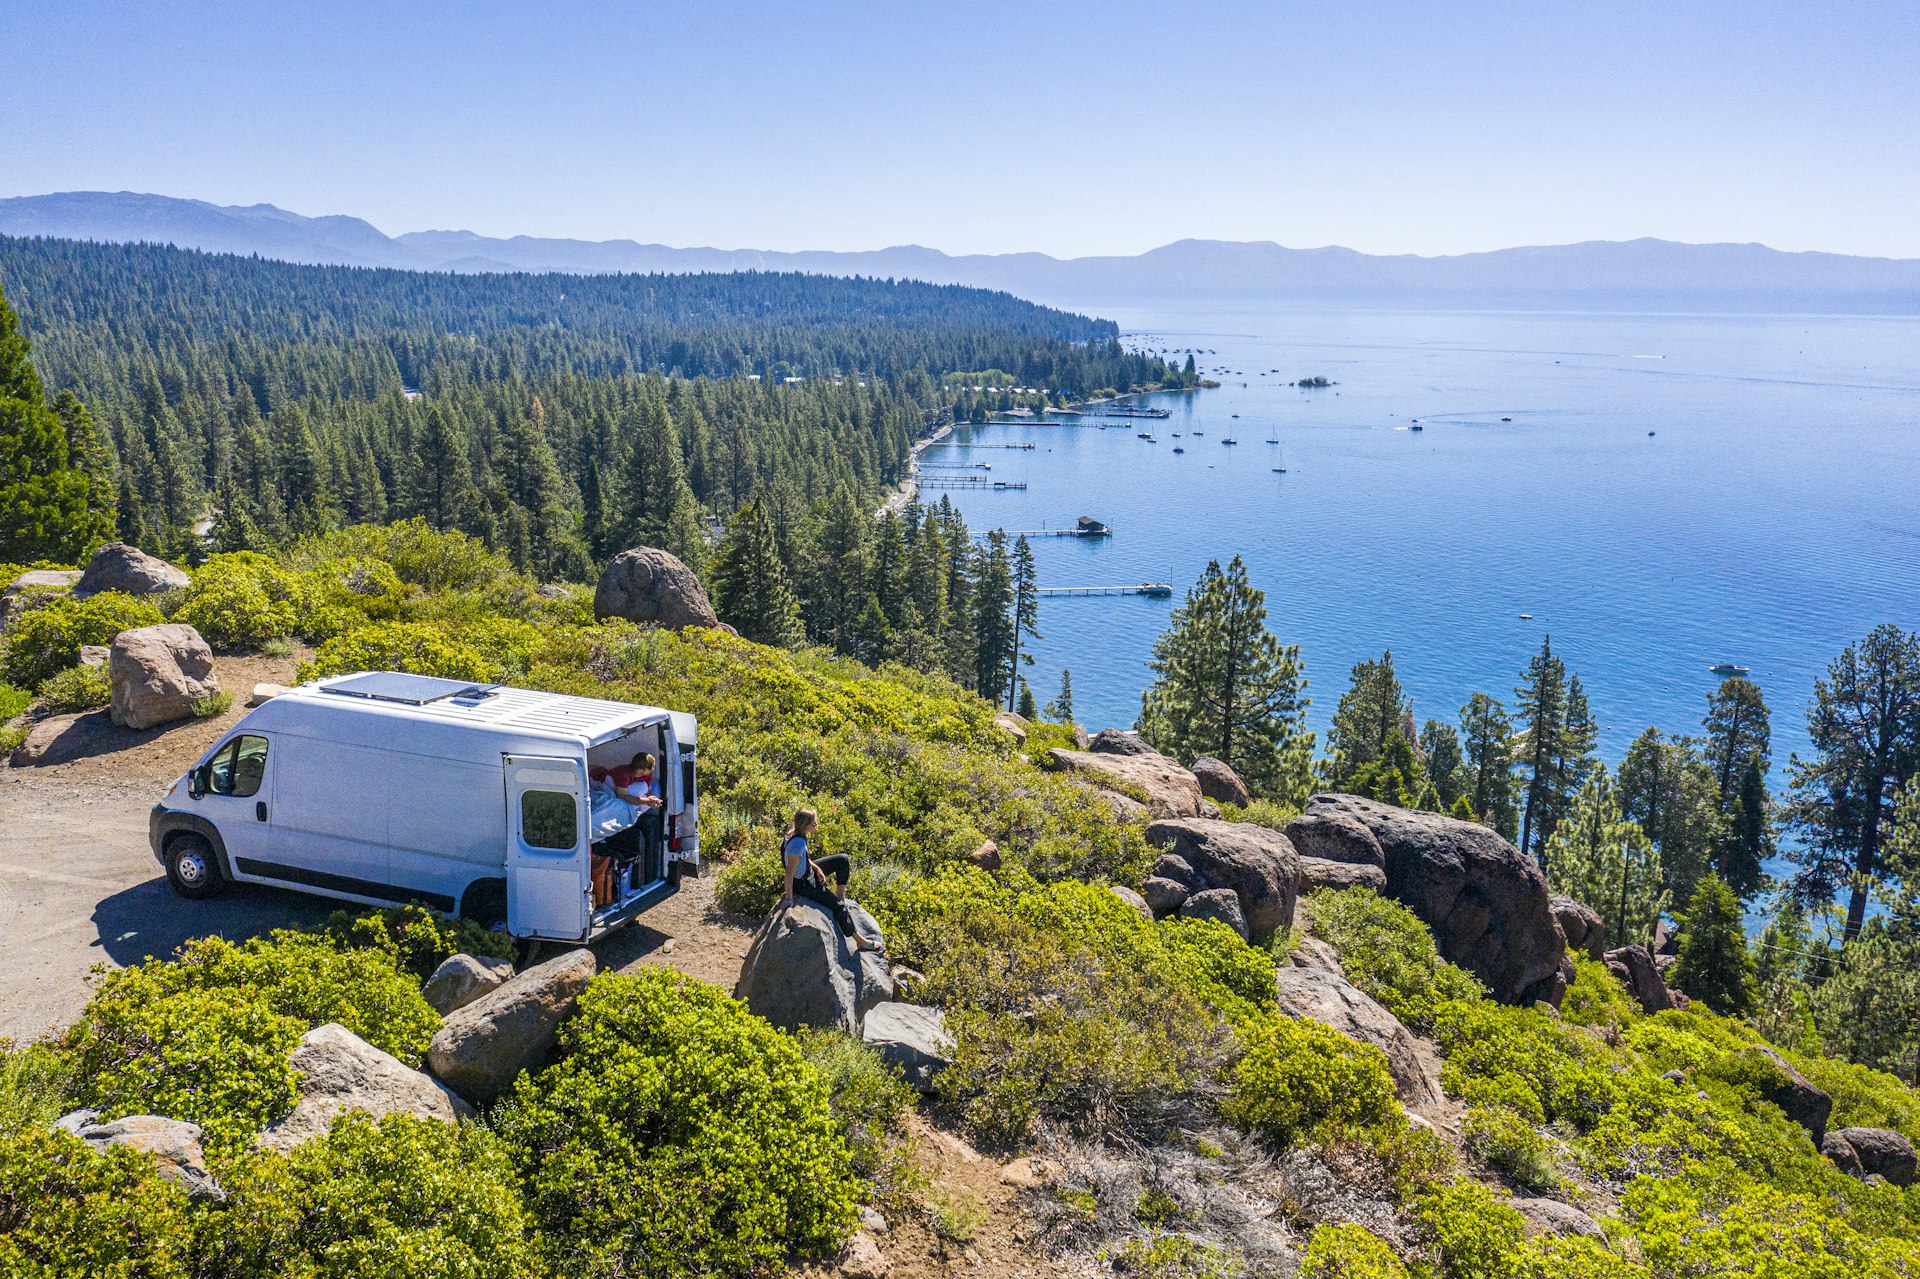 Aerial shot of a campervan at a viewpoint with two people sat overlooking a lake